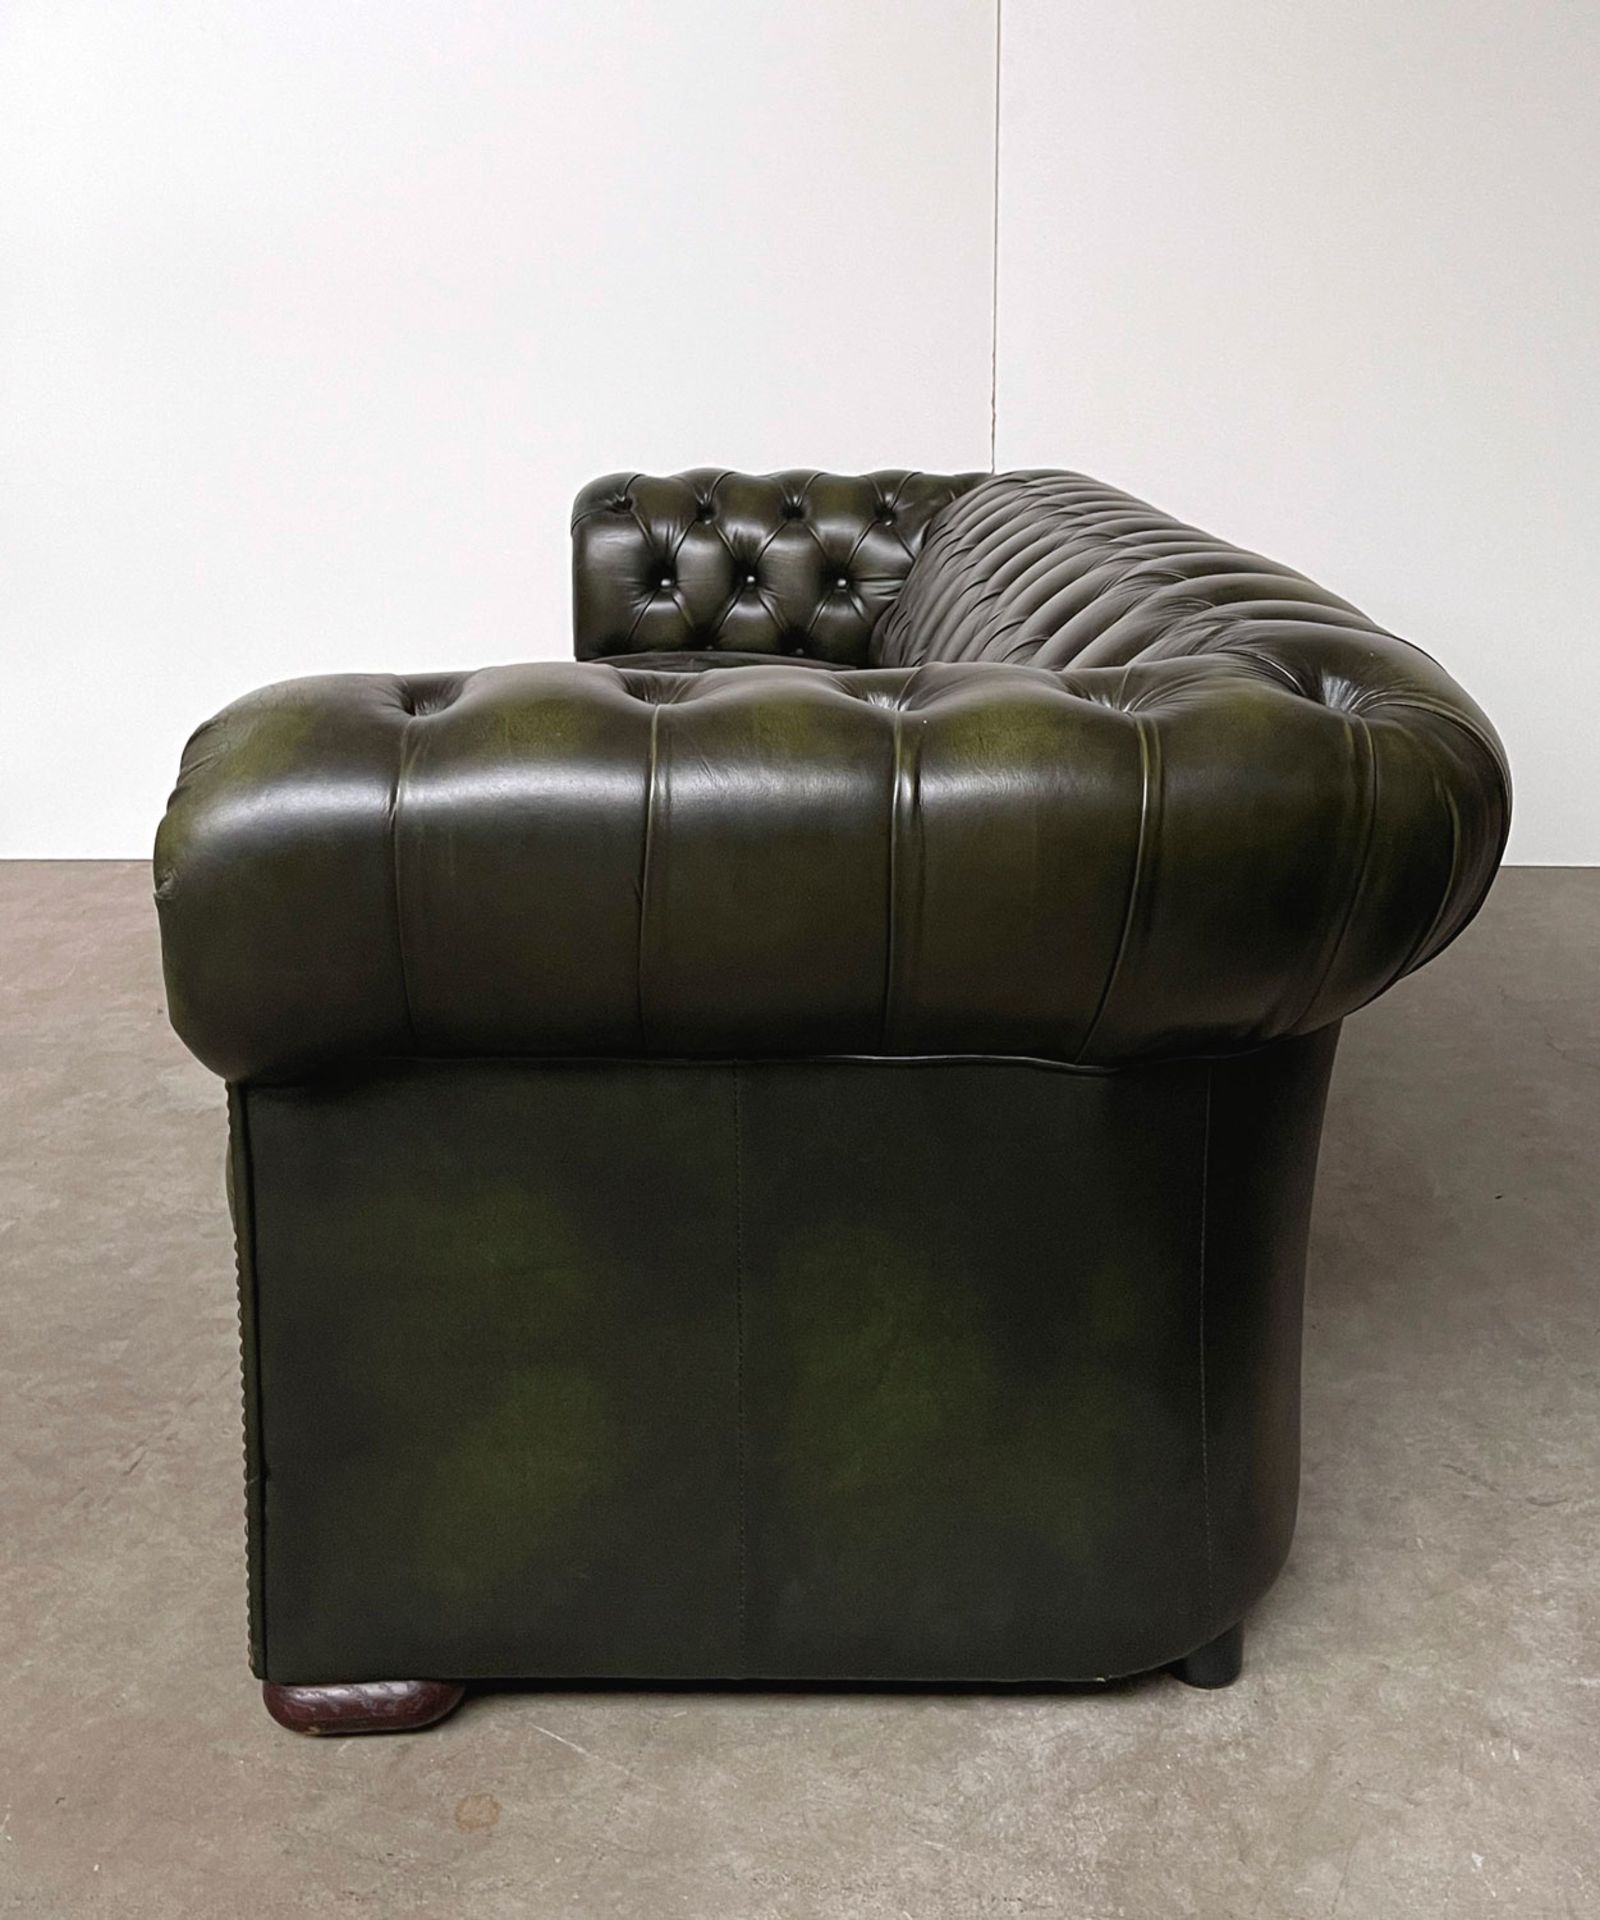 Green Leather Chesterfield Sofa - Image 7 of 10